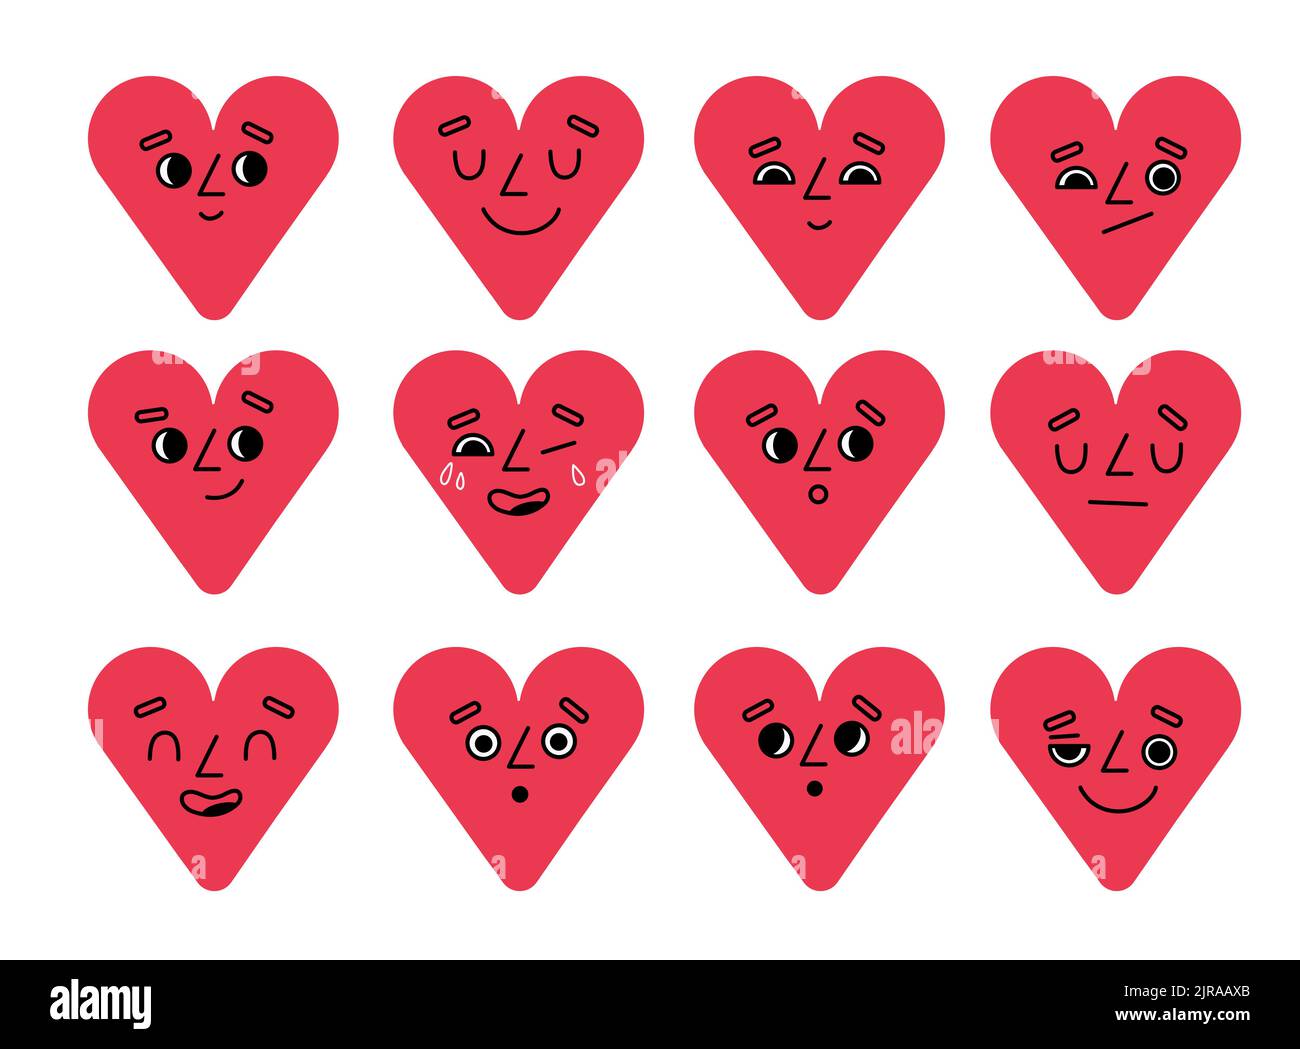 Cartoon hearts emoji. Funny smiles characters, red love symbols stickers collection. Happy, surprised and laughing valentines faces, various Stock Vector